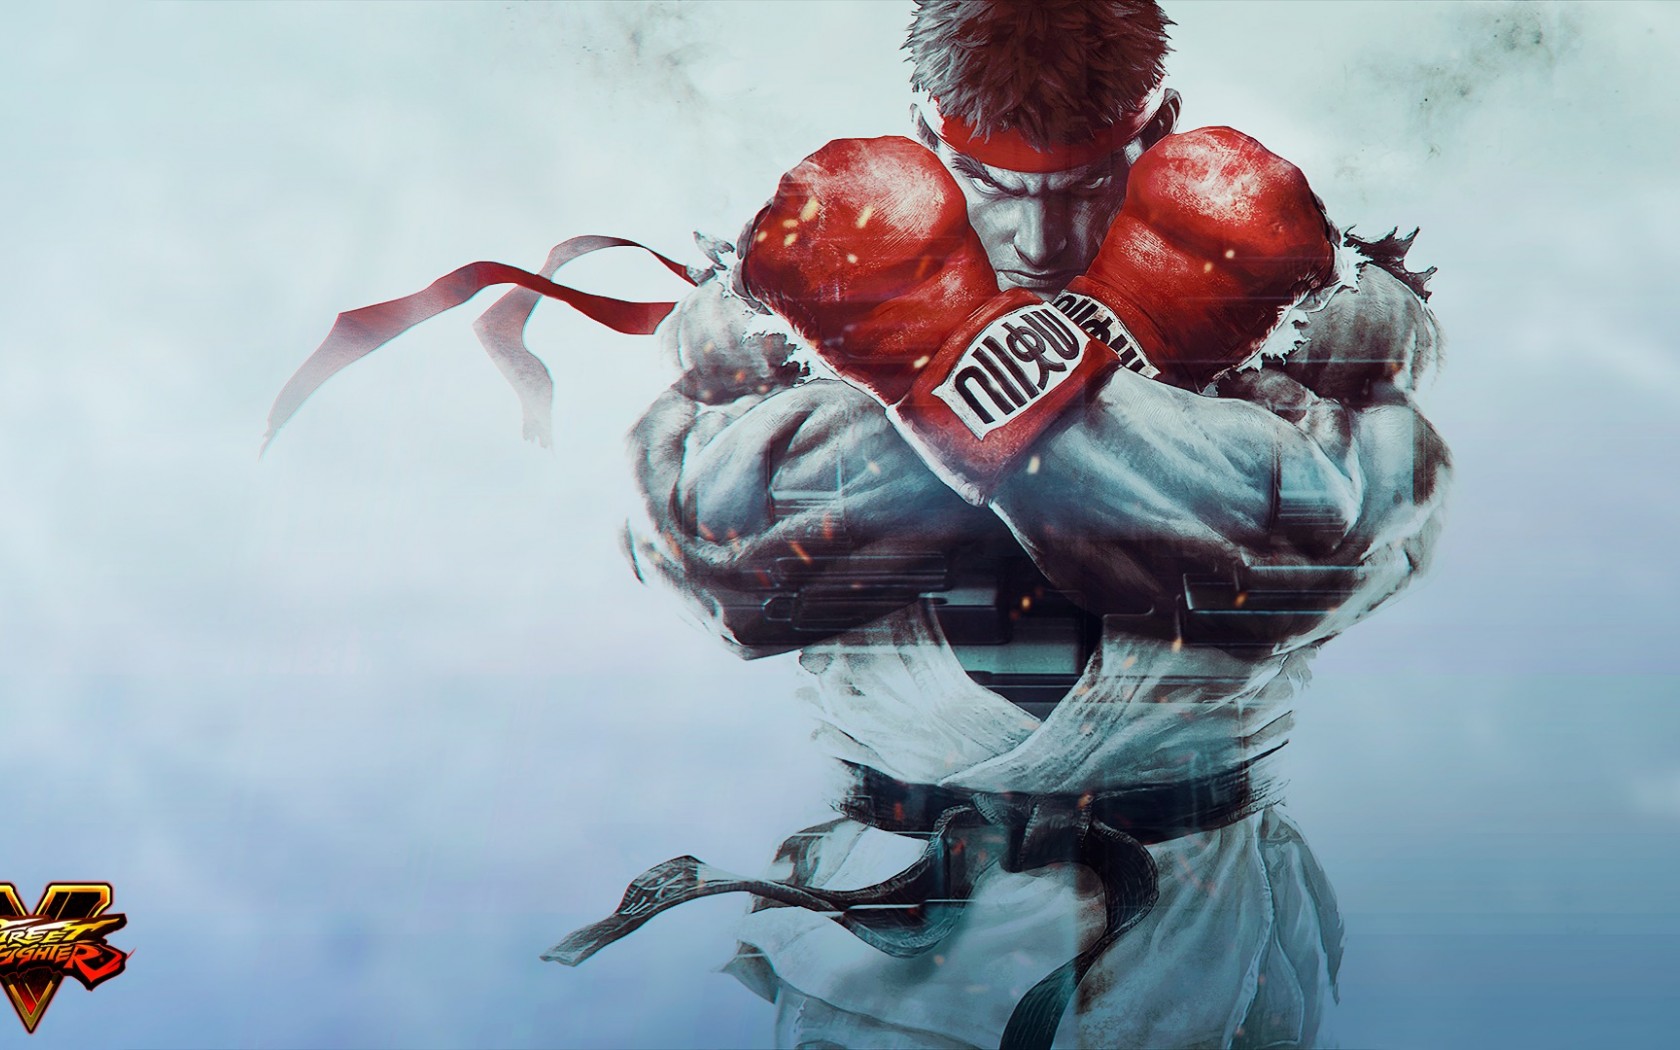 Ryu Showing He Has More Fly Breakdancing Moves For Ya